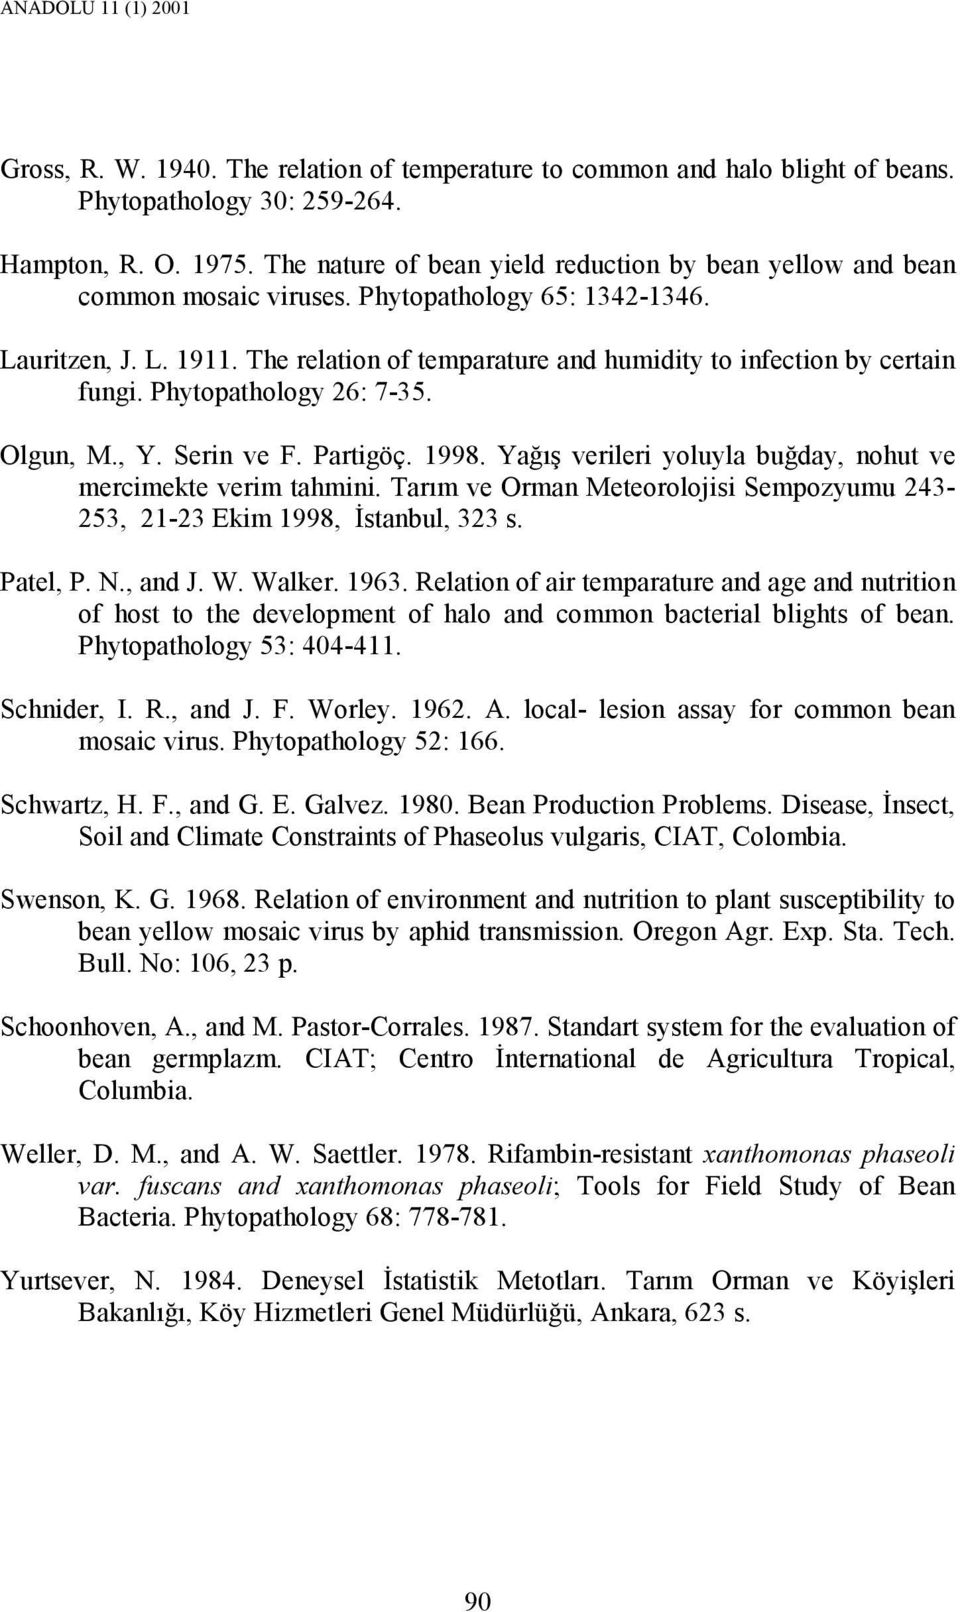 The relation of temparature and humidity to infection by certain fungi. Phytopathology 26: 7-35. Olgun, M., Y. Serin ve F. Partigöç. 1998.